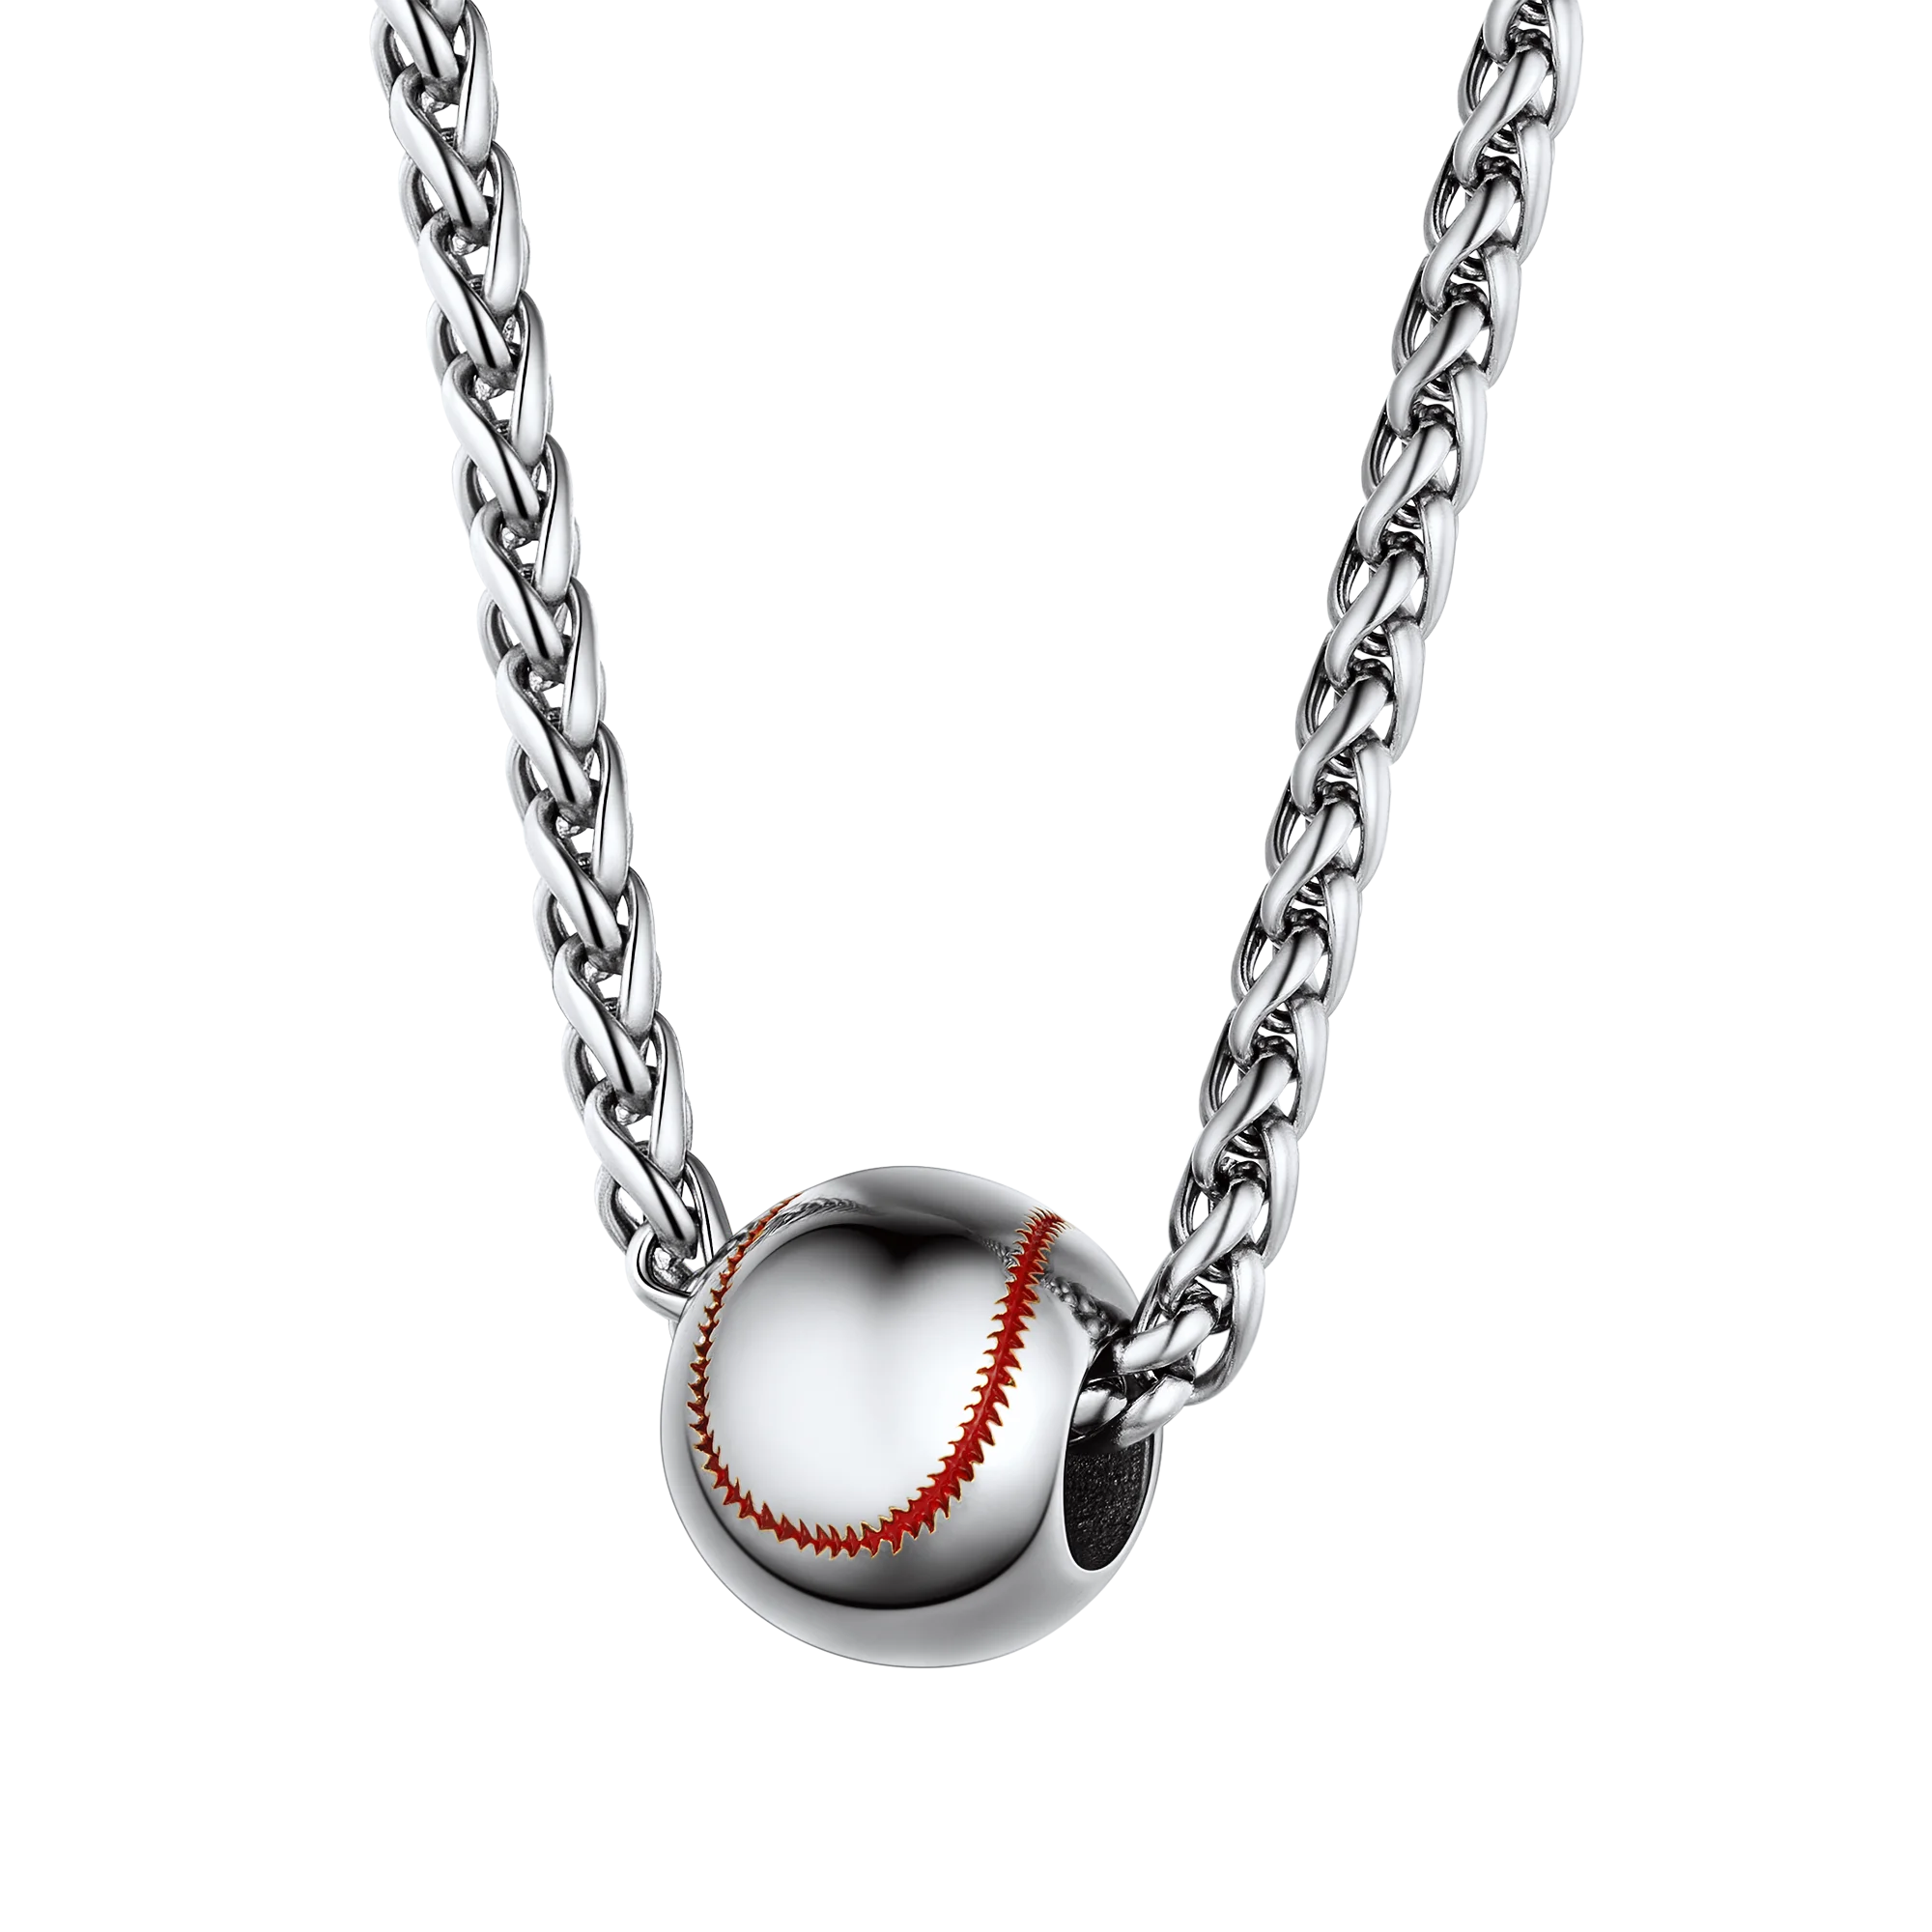 Fashion Ball Necklace Stainless Steel Jewelry Basketball No24 Charm Pendant  Necklaces For Women Men Sports Trinket Choker Gift | Fruugo BH